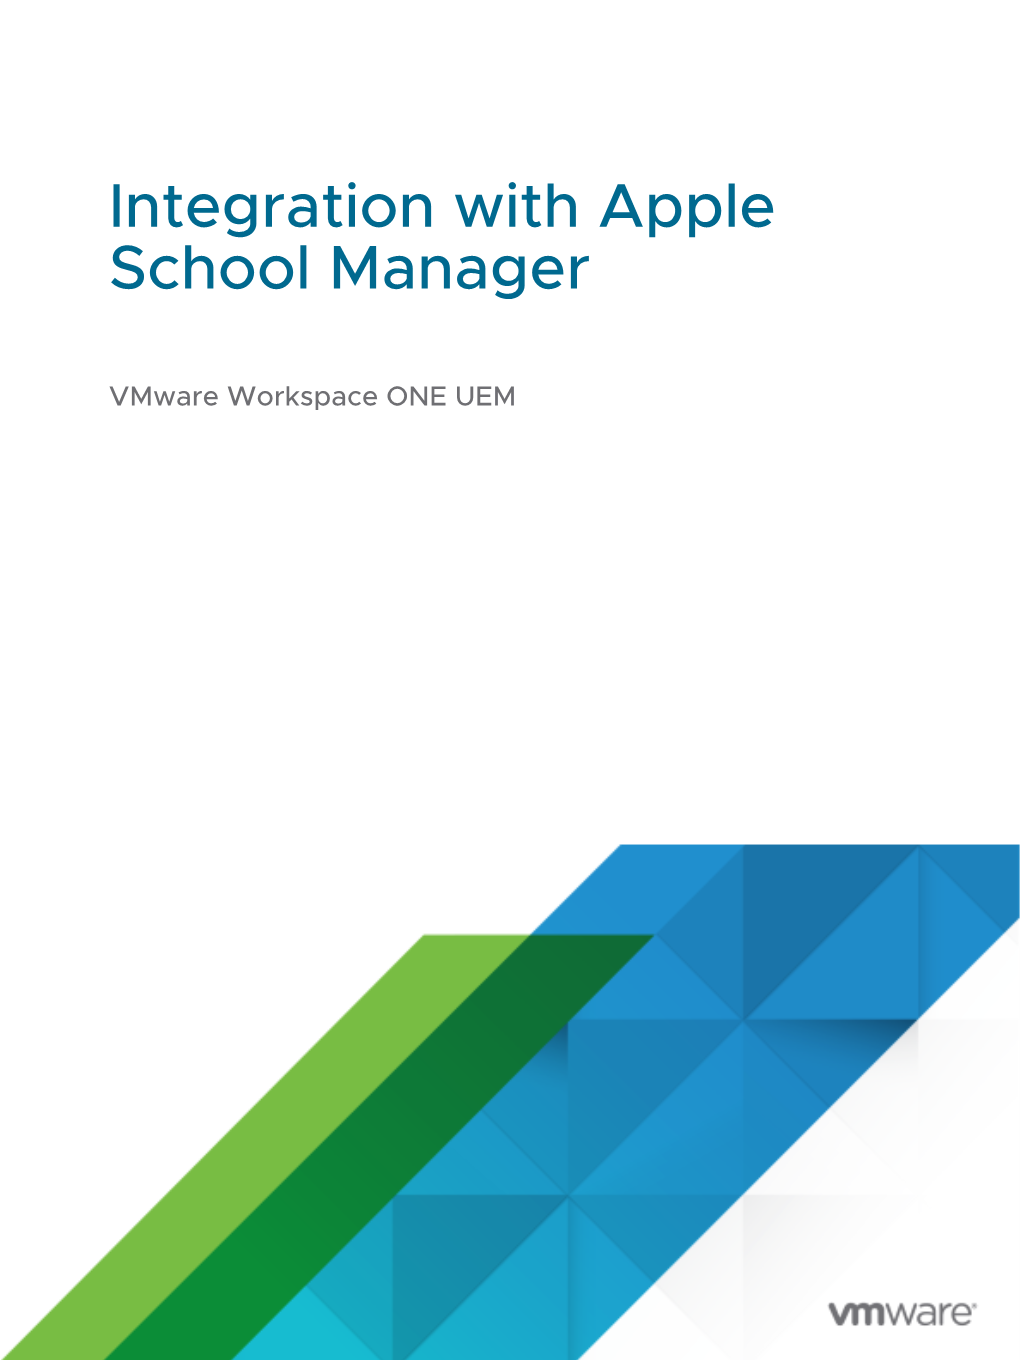 Integration with Apple School Manager